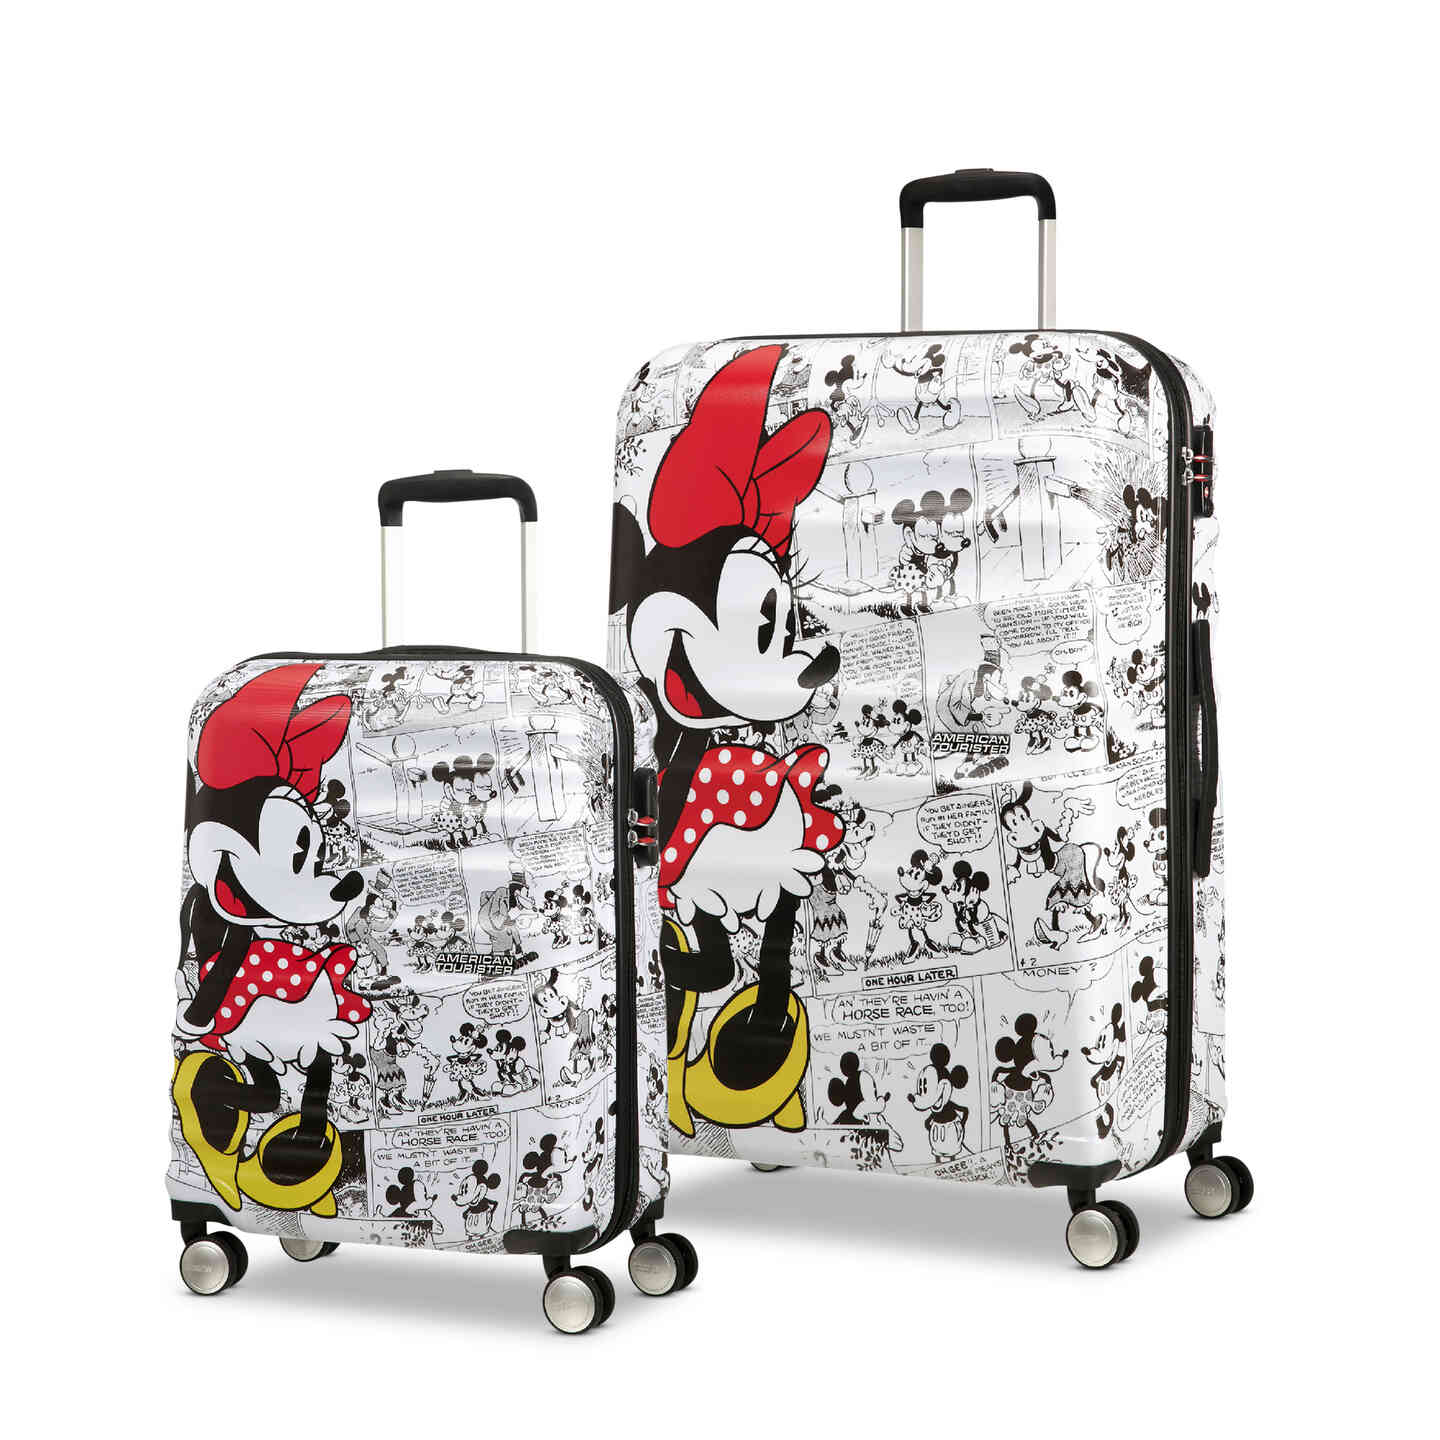 Click here to shop all luggage and bags in everyone's most lovable mouse, Minnie.